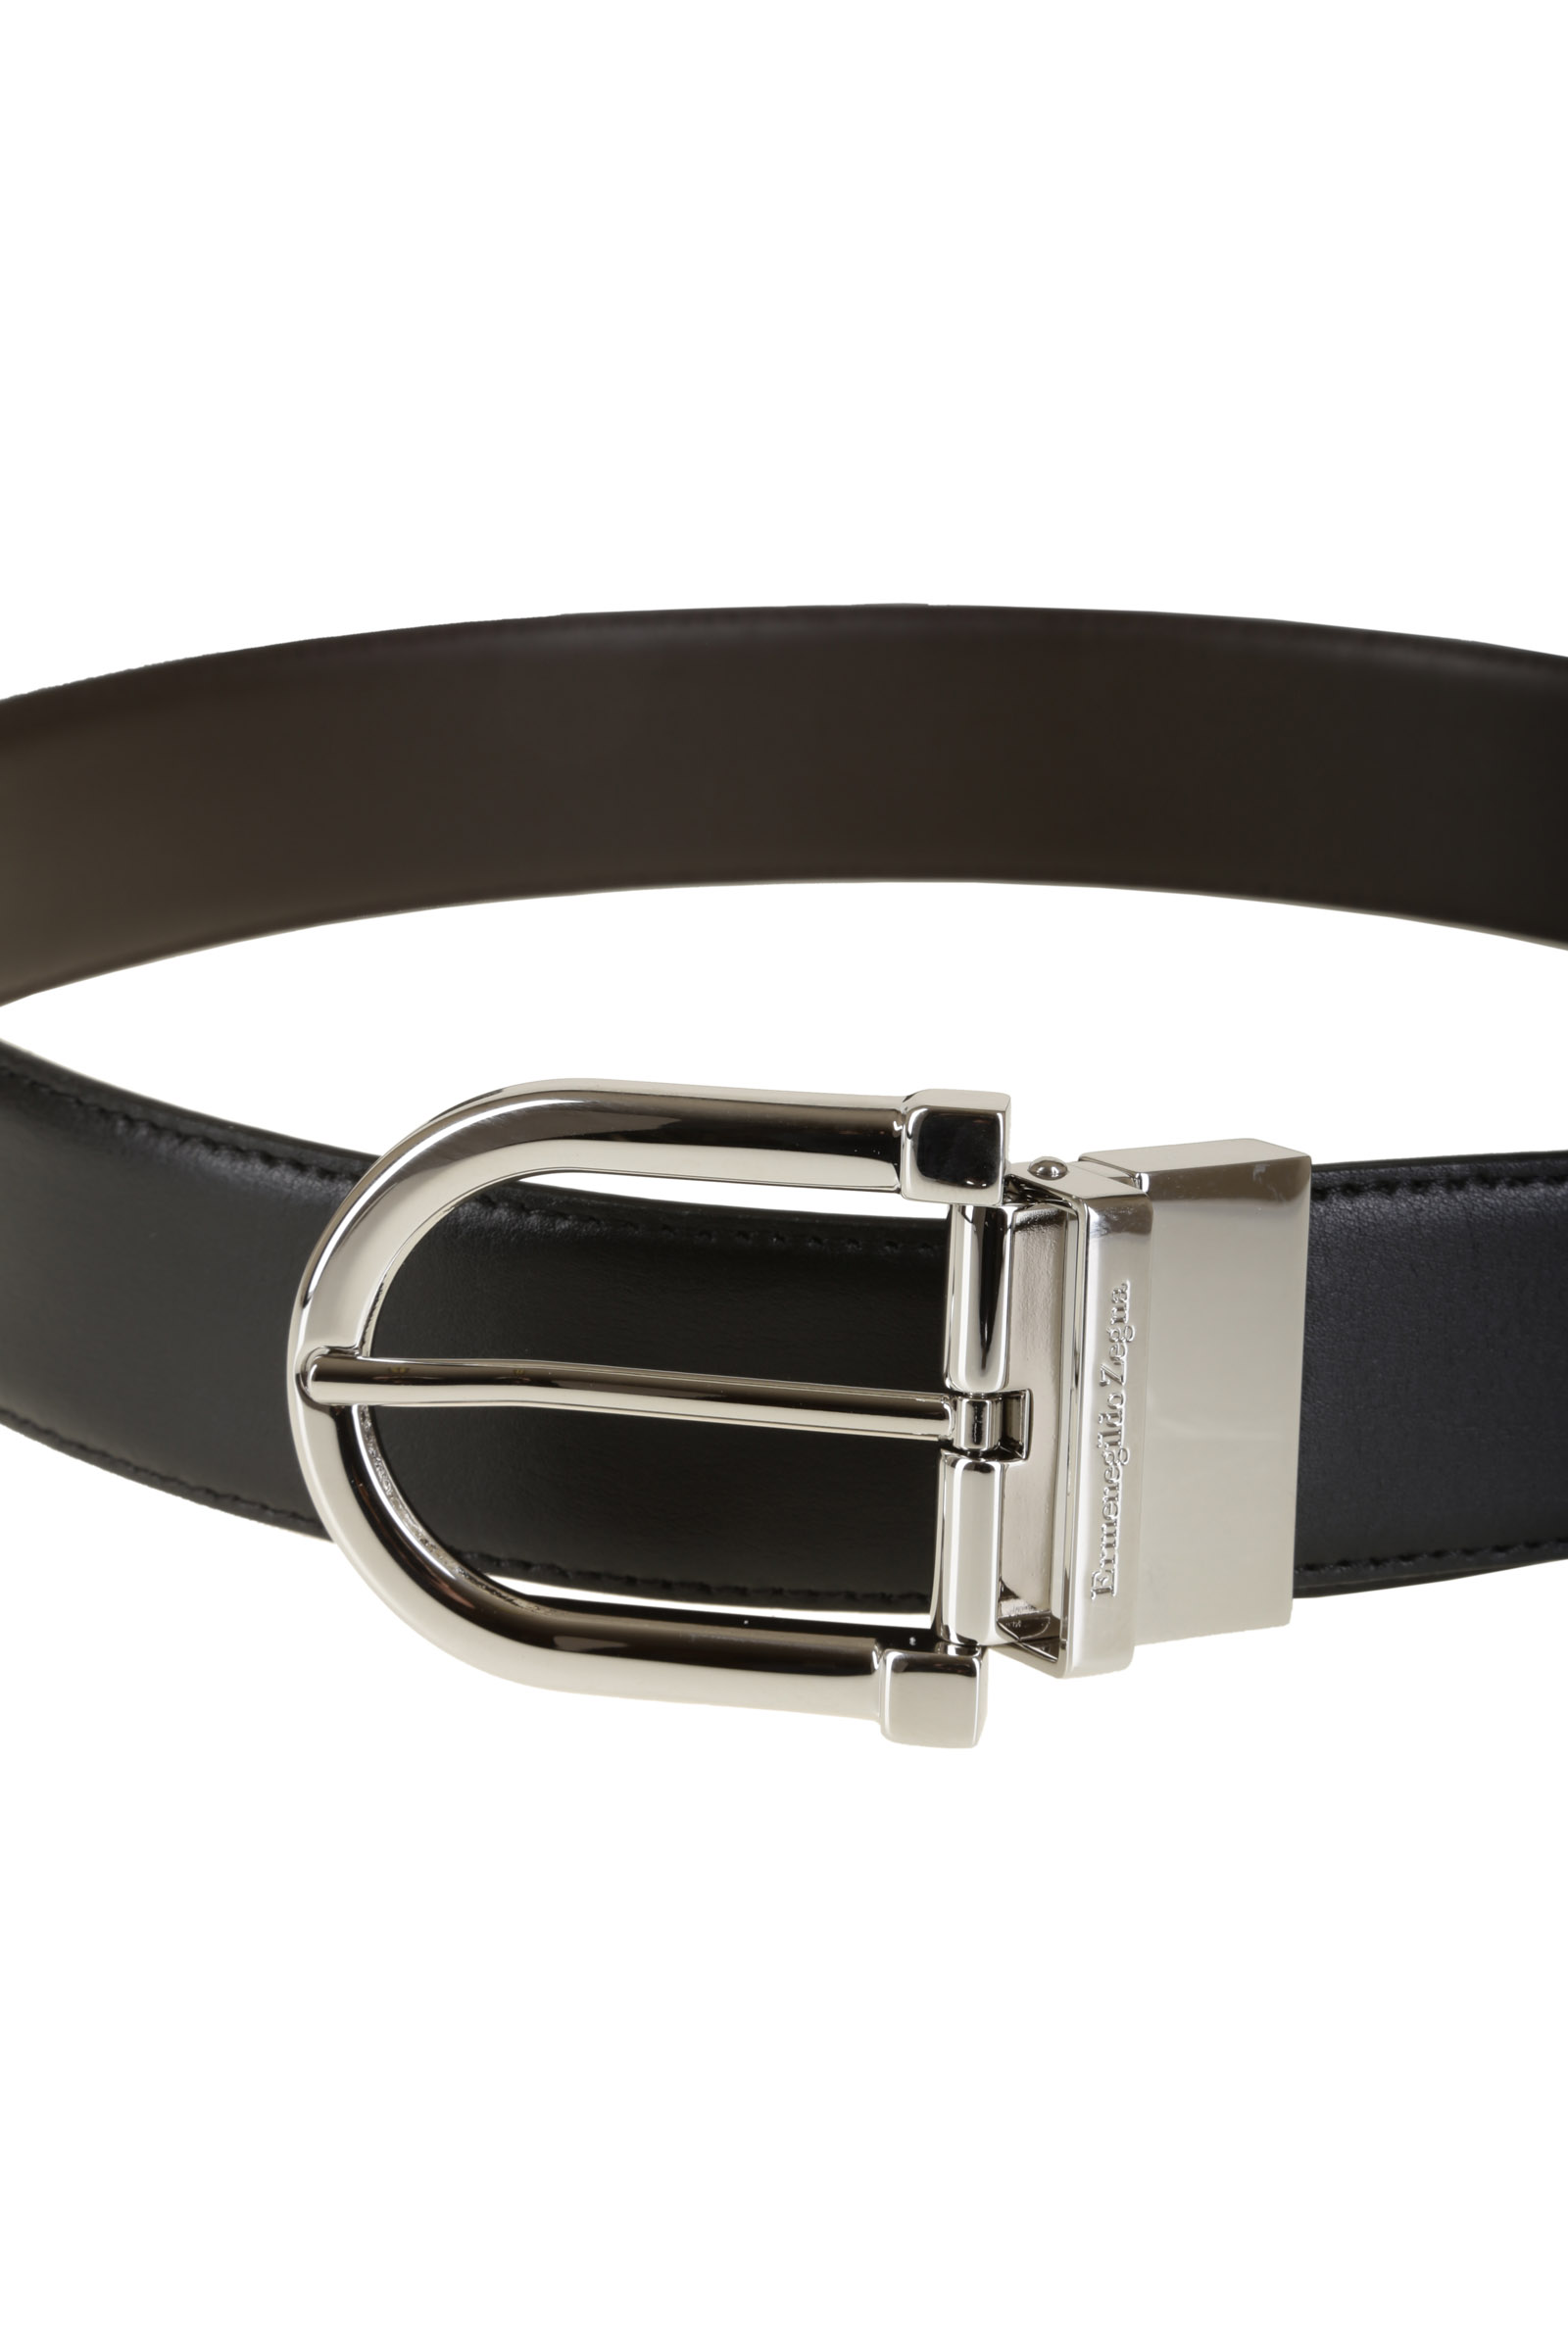 Picture of Zegna | Belt